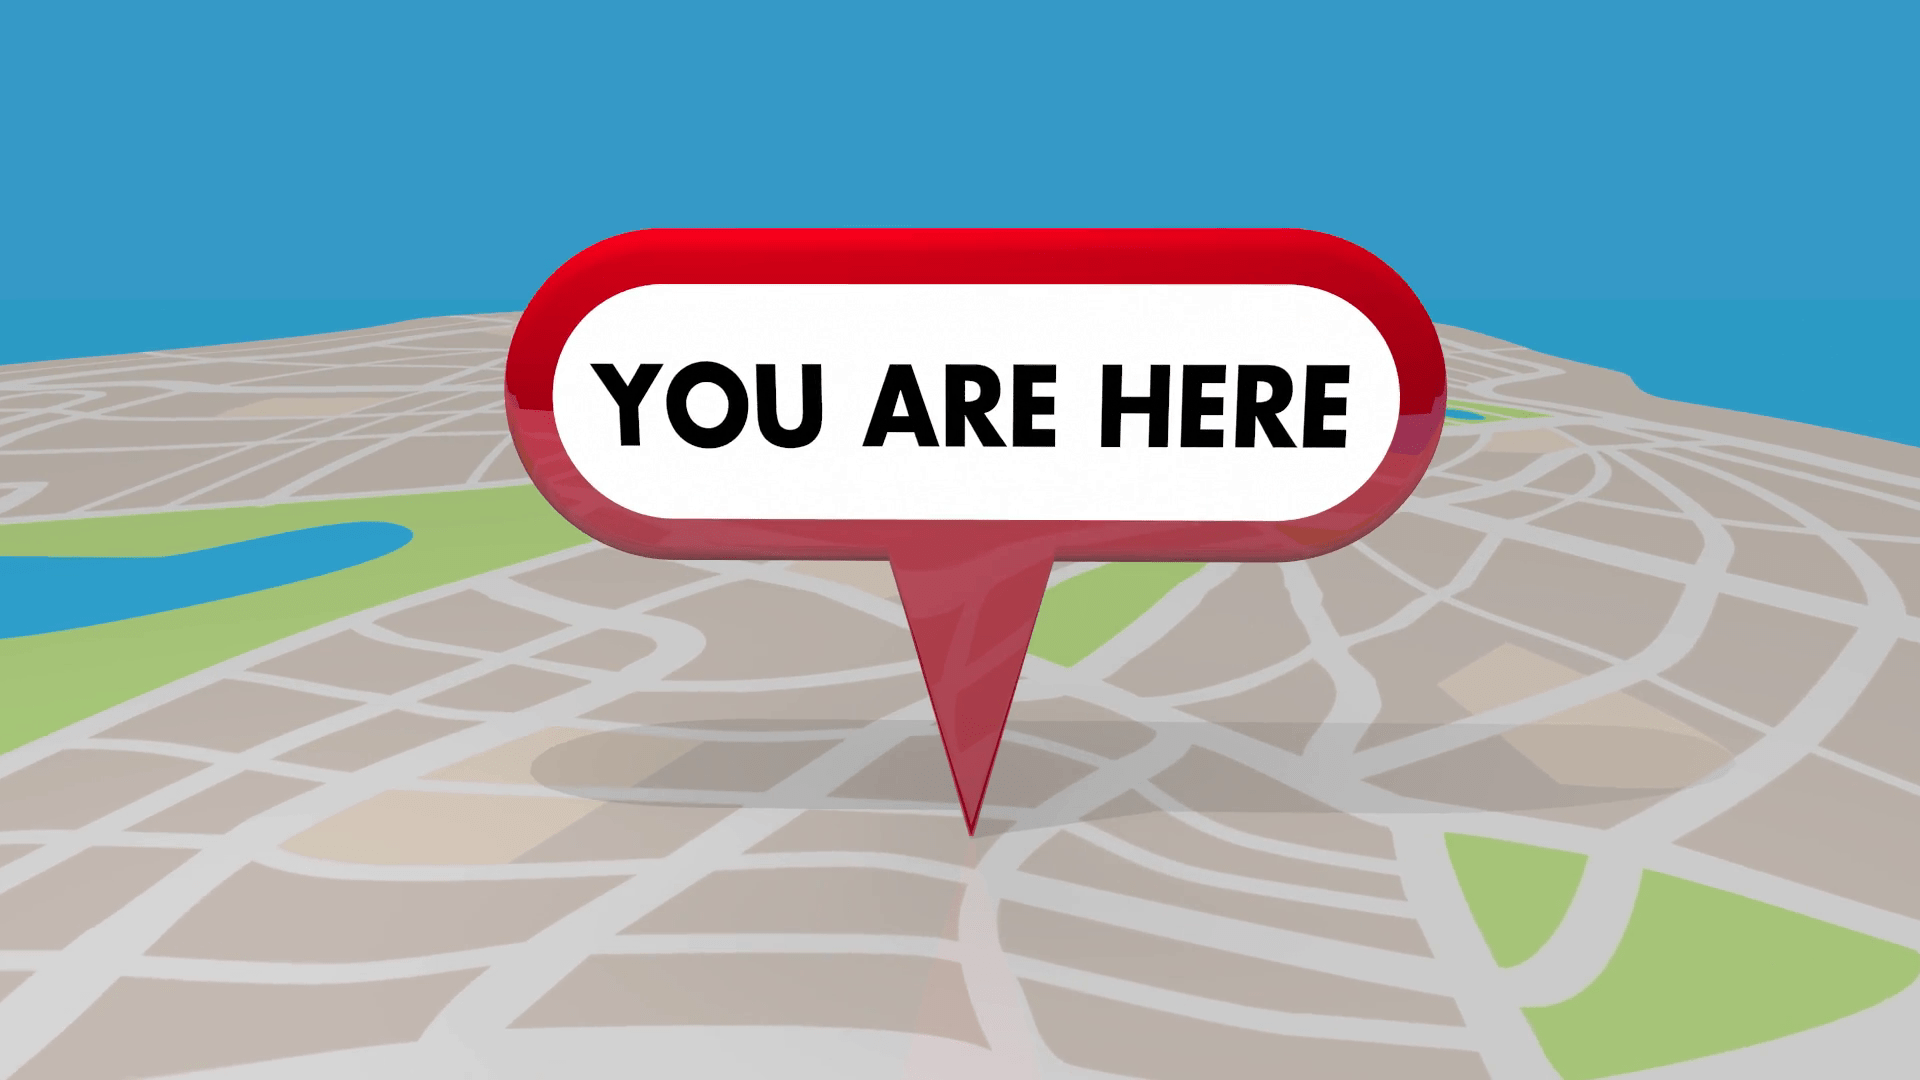 "You Are Here" sign